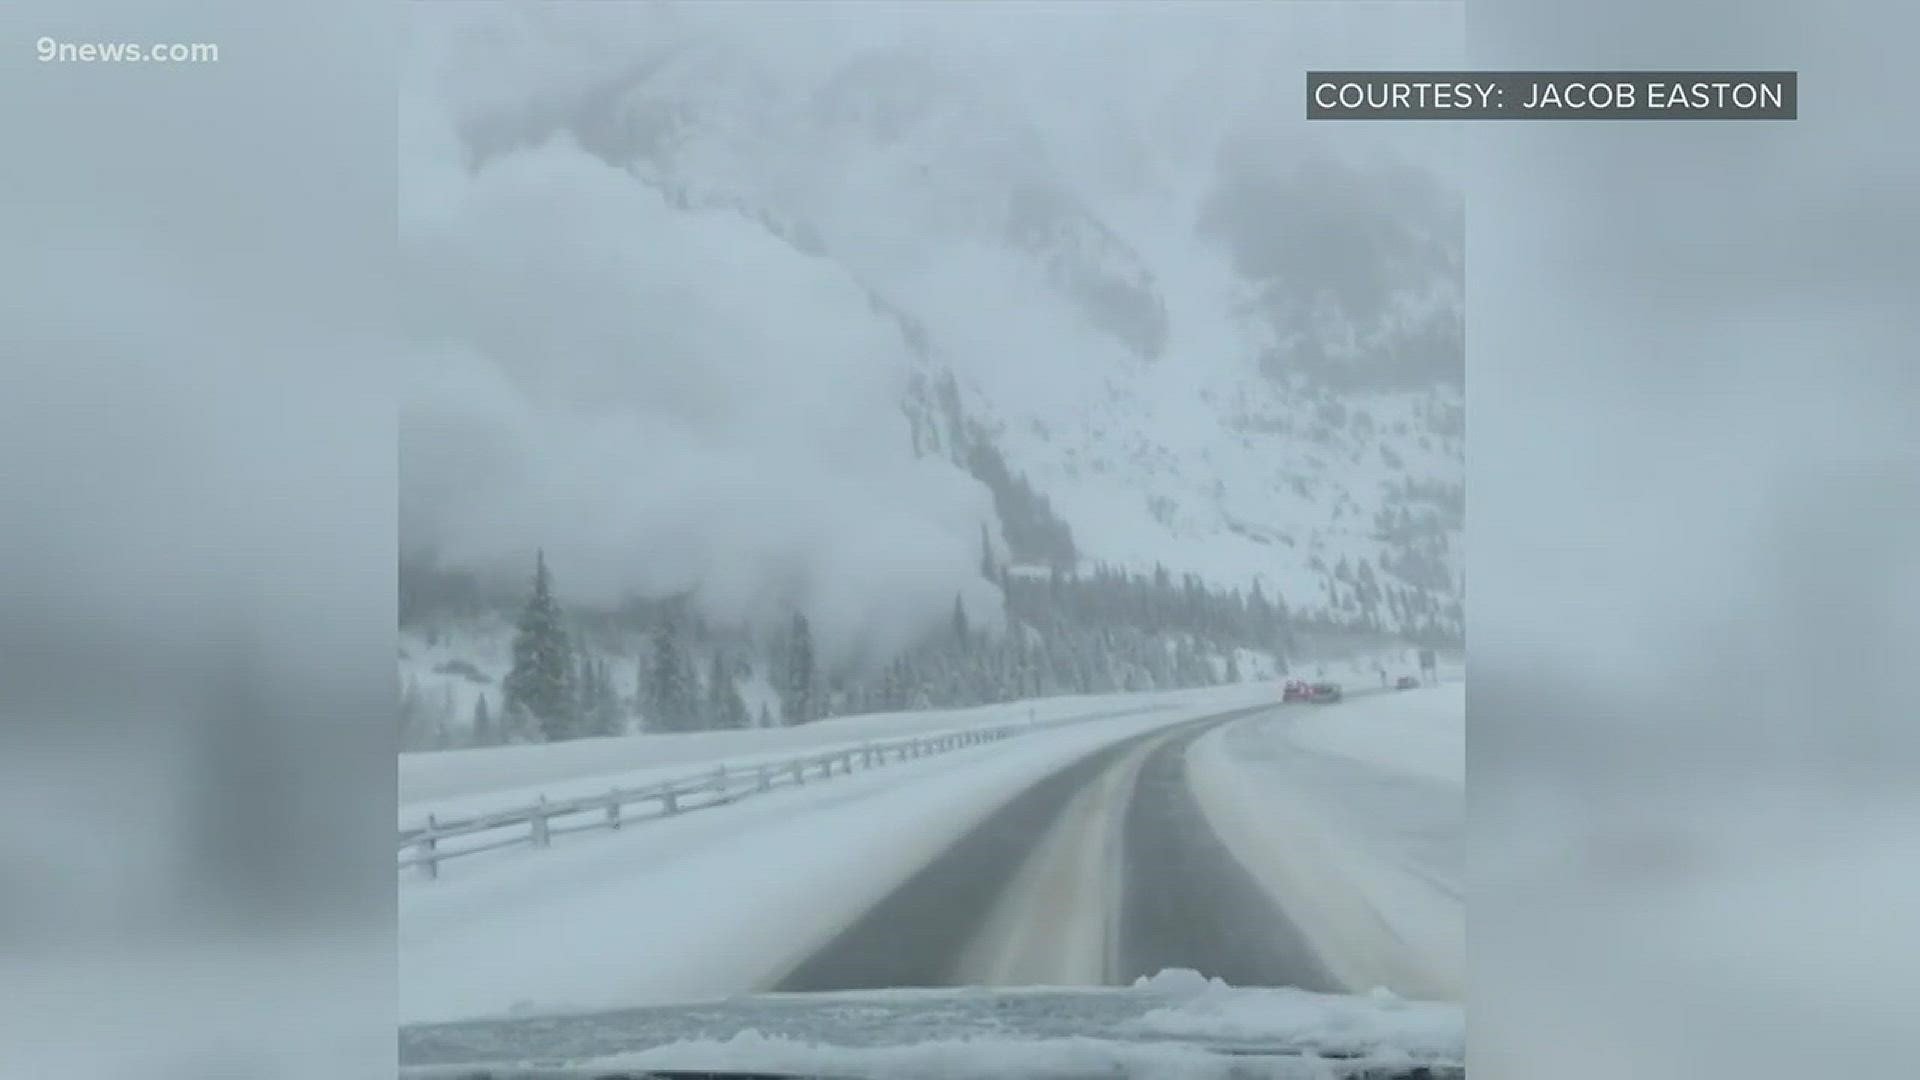 As skiers and snowboarders were heading home this evening, an avalanche covered the interstate in snow. It was the second slide in the same area Sunday.